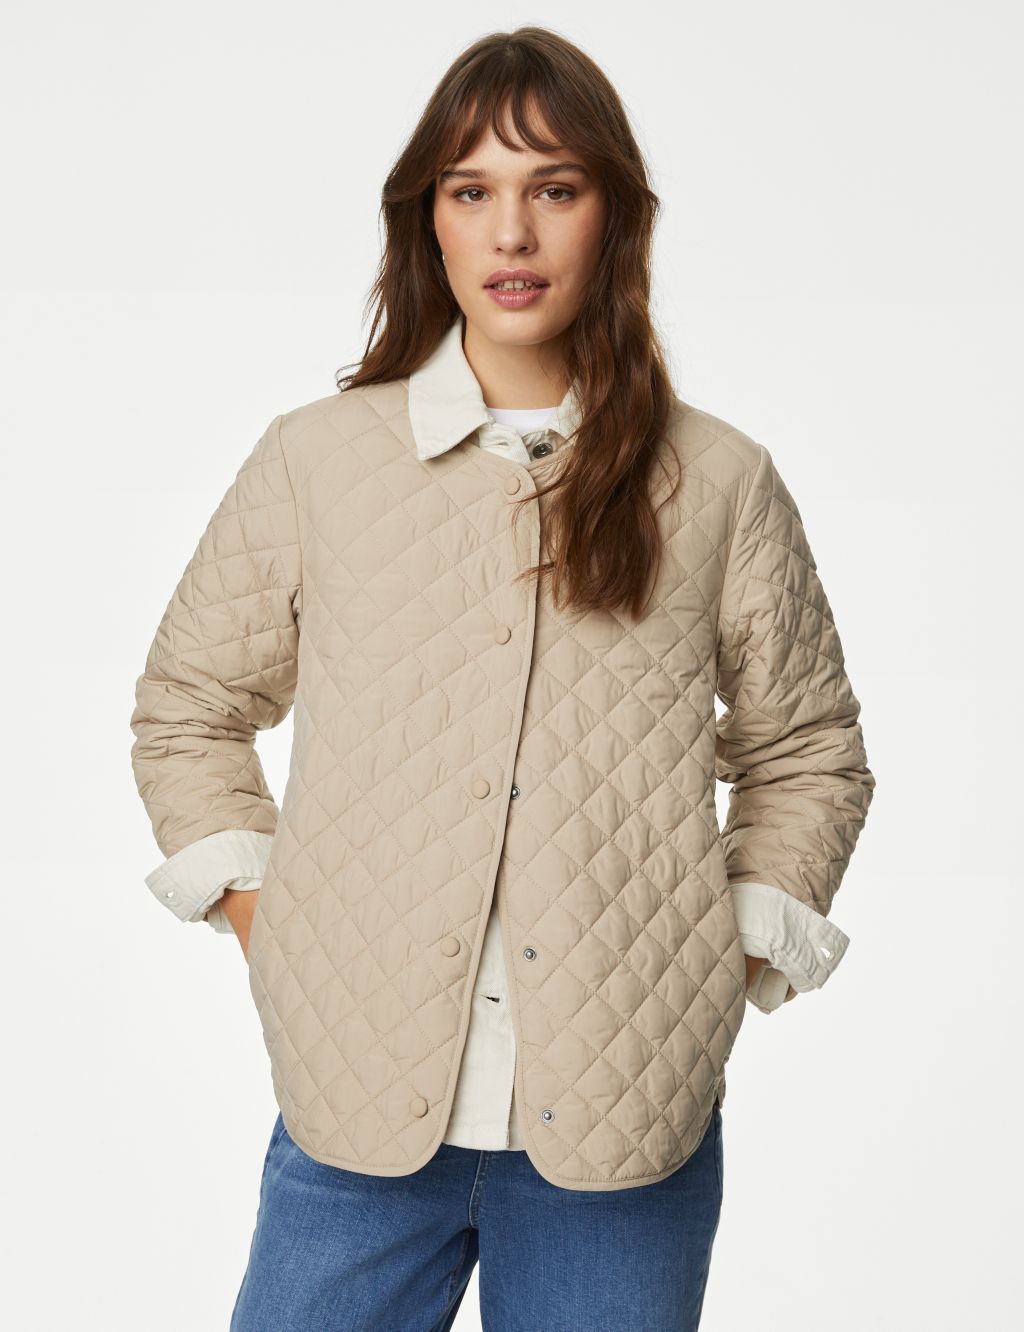 Cottonhill Beige Women Plus Size Clothing Styles, Prices - Trendyol